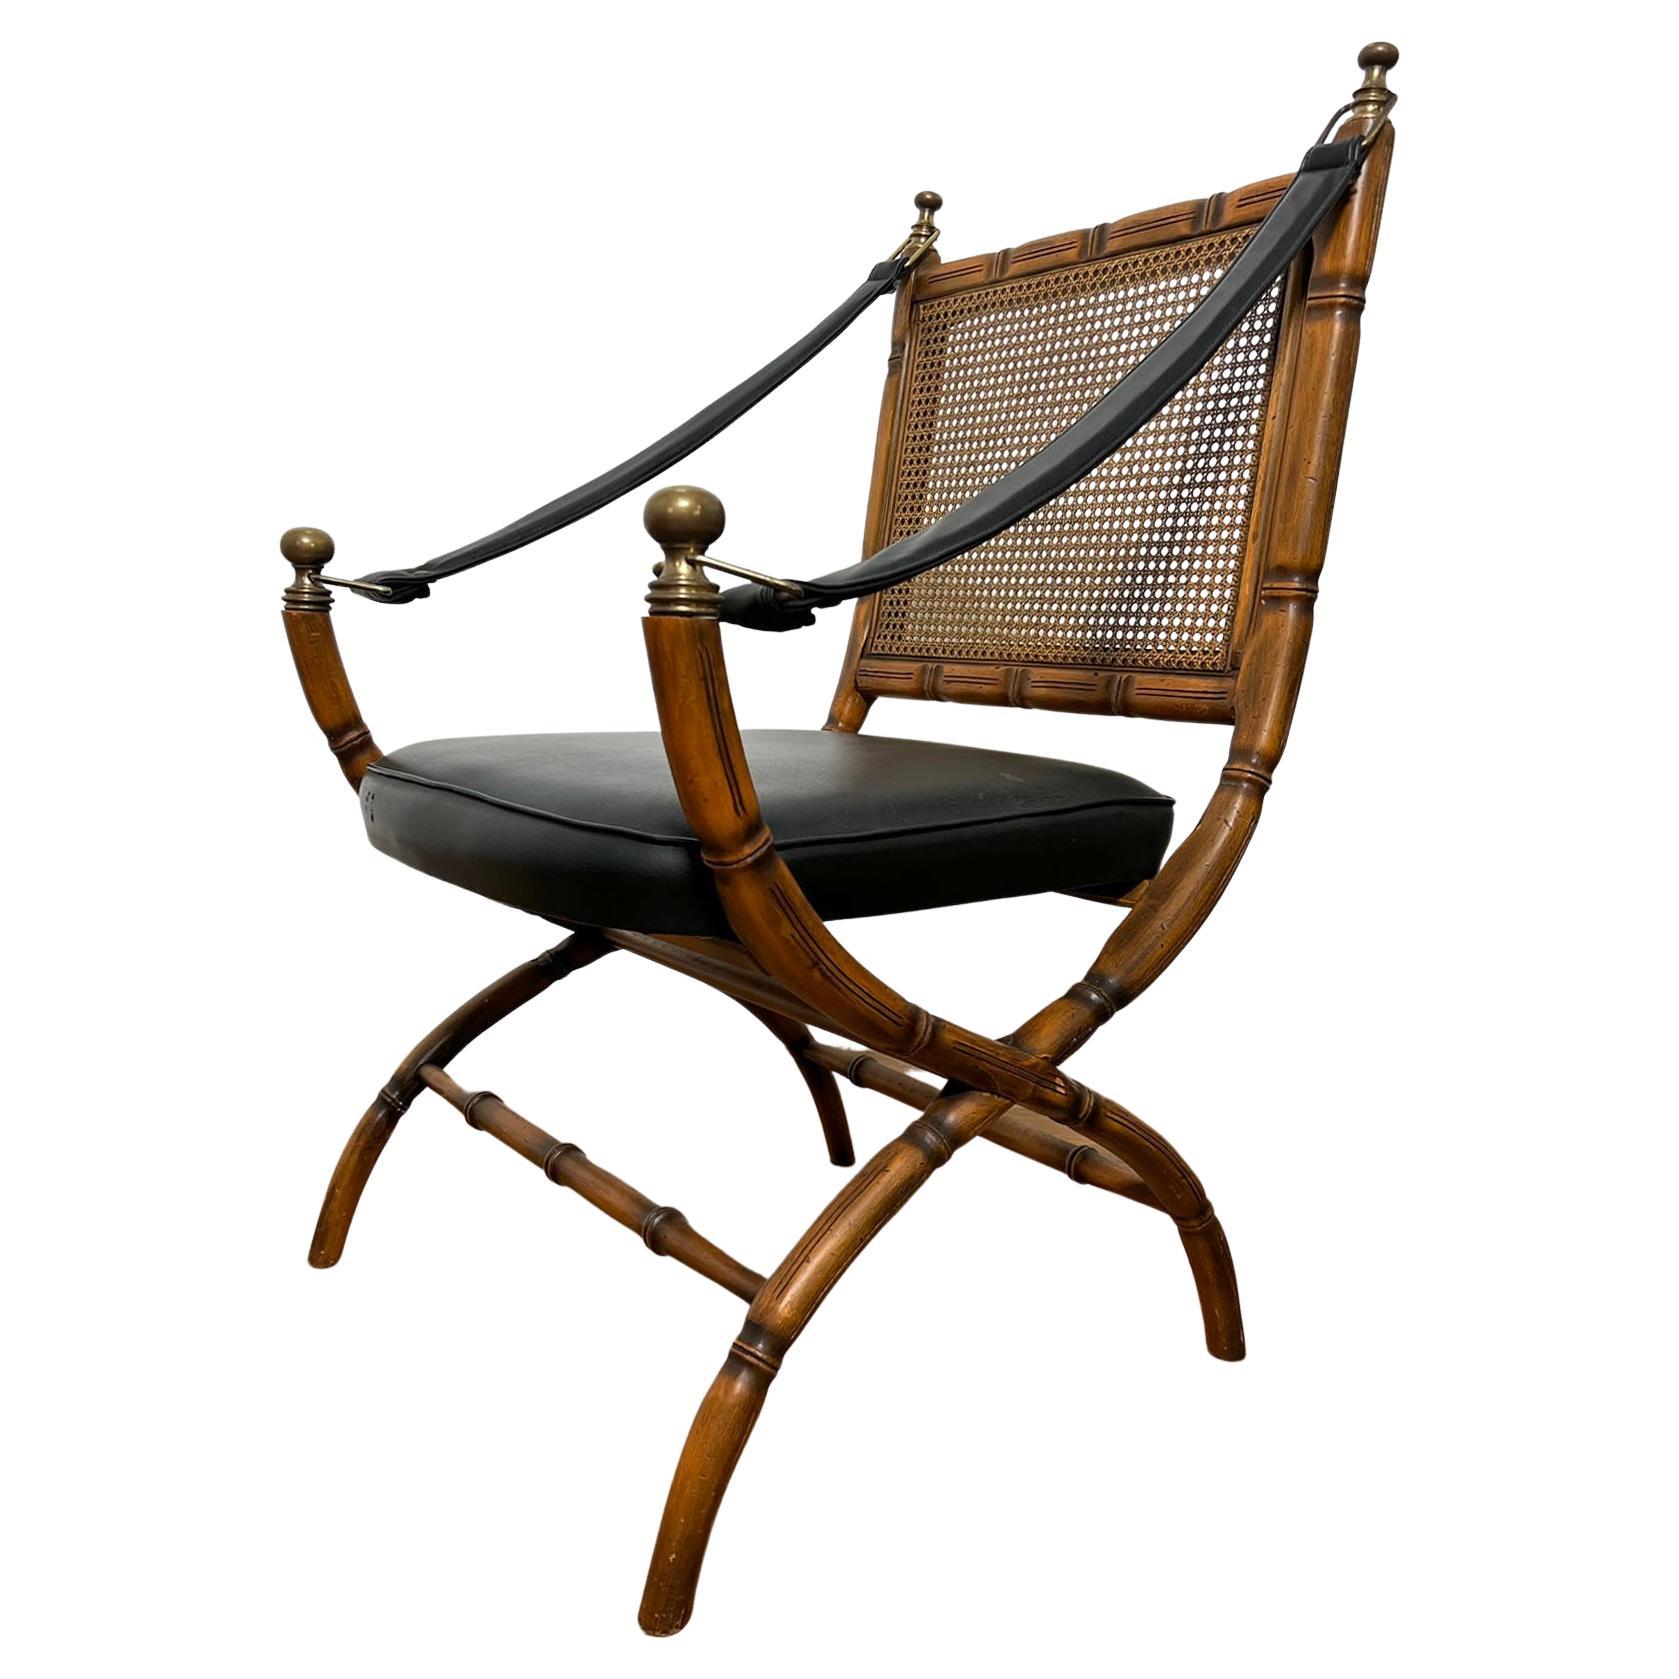 Italian Faux Bamboo and Cane Campaign Style Chair Circa 1960s